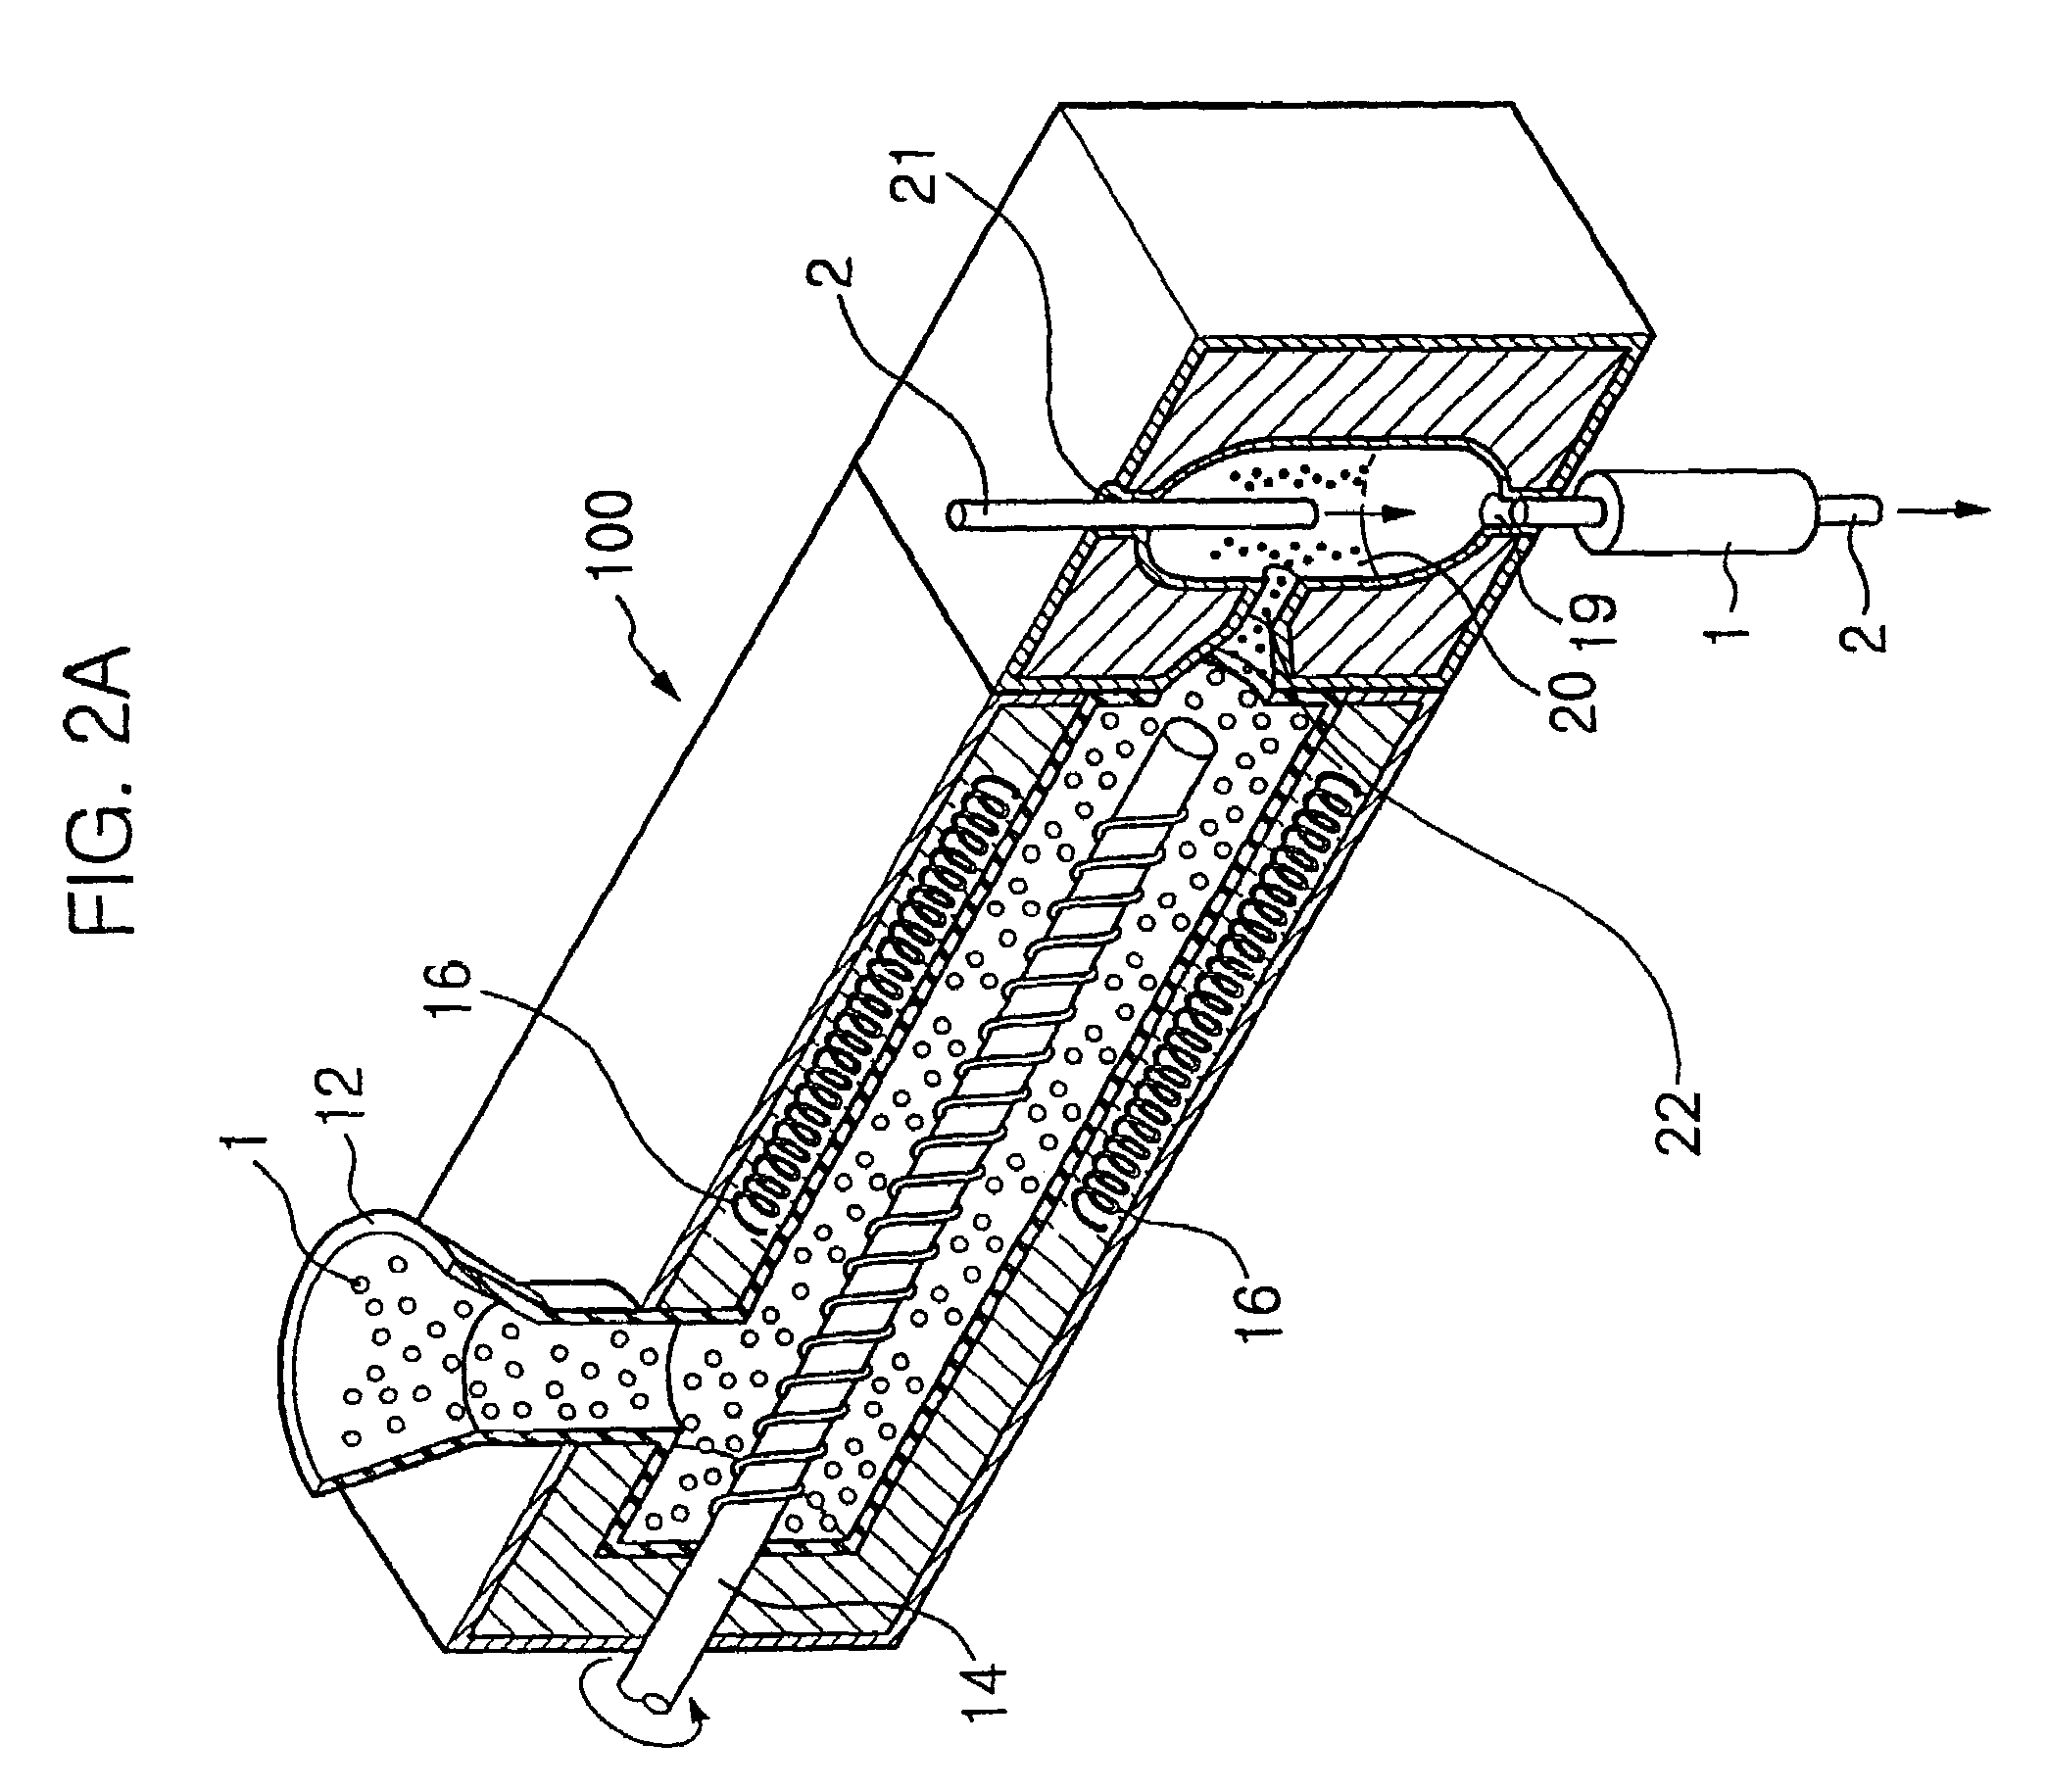 Charge roller of developing device for image forming apparatus, method for fabricating the same and tool for fabricating charge roller